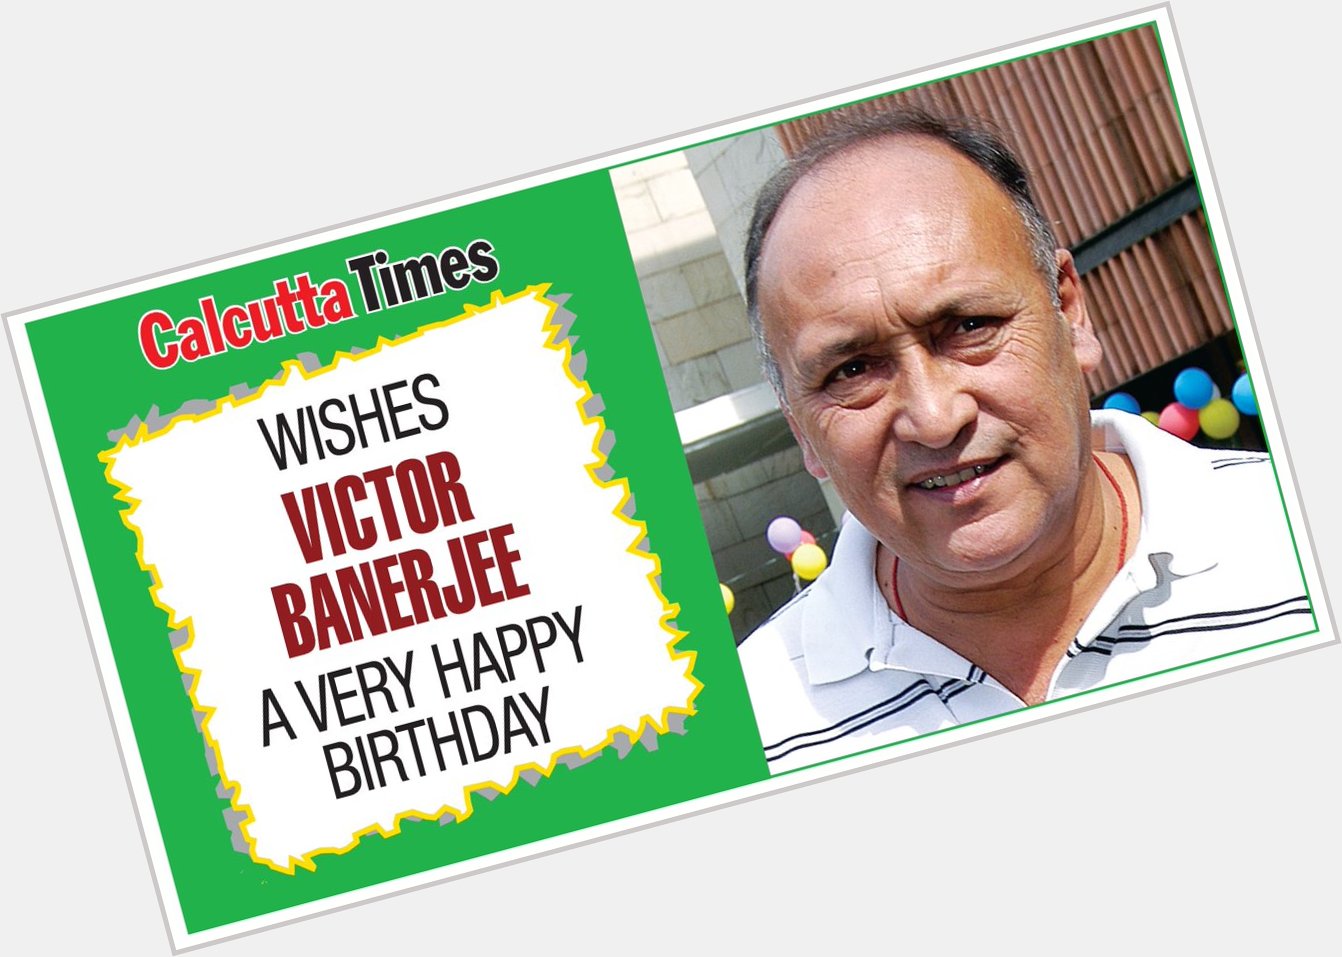 Team CT wishes Victor Banerjee a very happy birthday. 